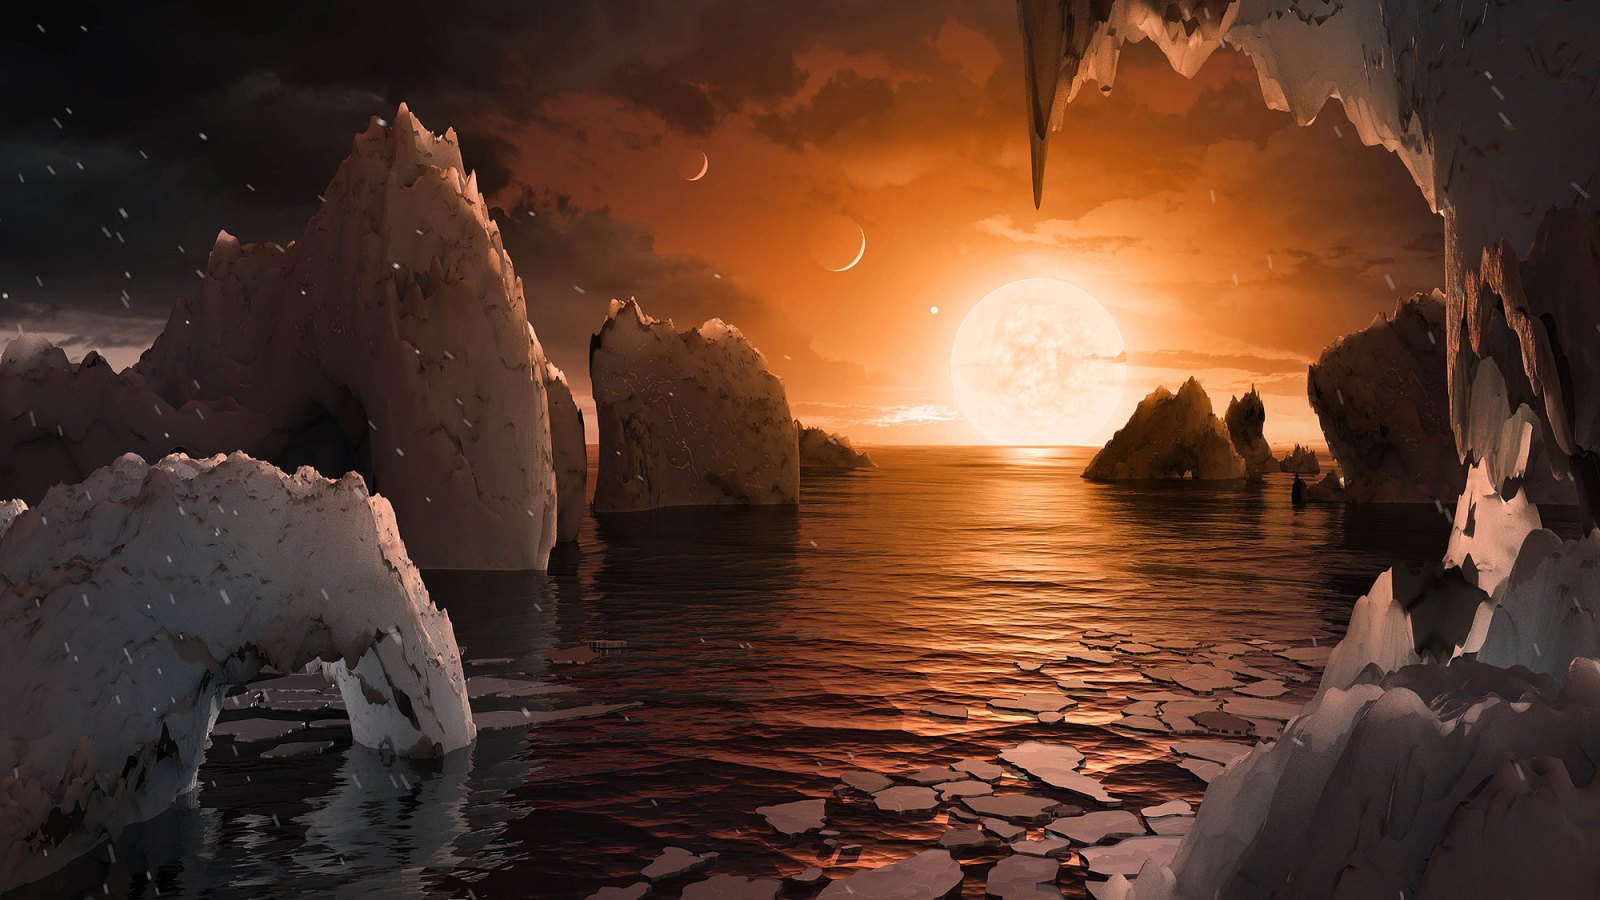 This artist's concept allows us to imagine what it would be like to stand on the surface of the exoplanet TRAPPIST-1f, located in the TRAPPIST-1 system in the constellation Aquarius.